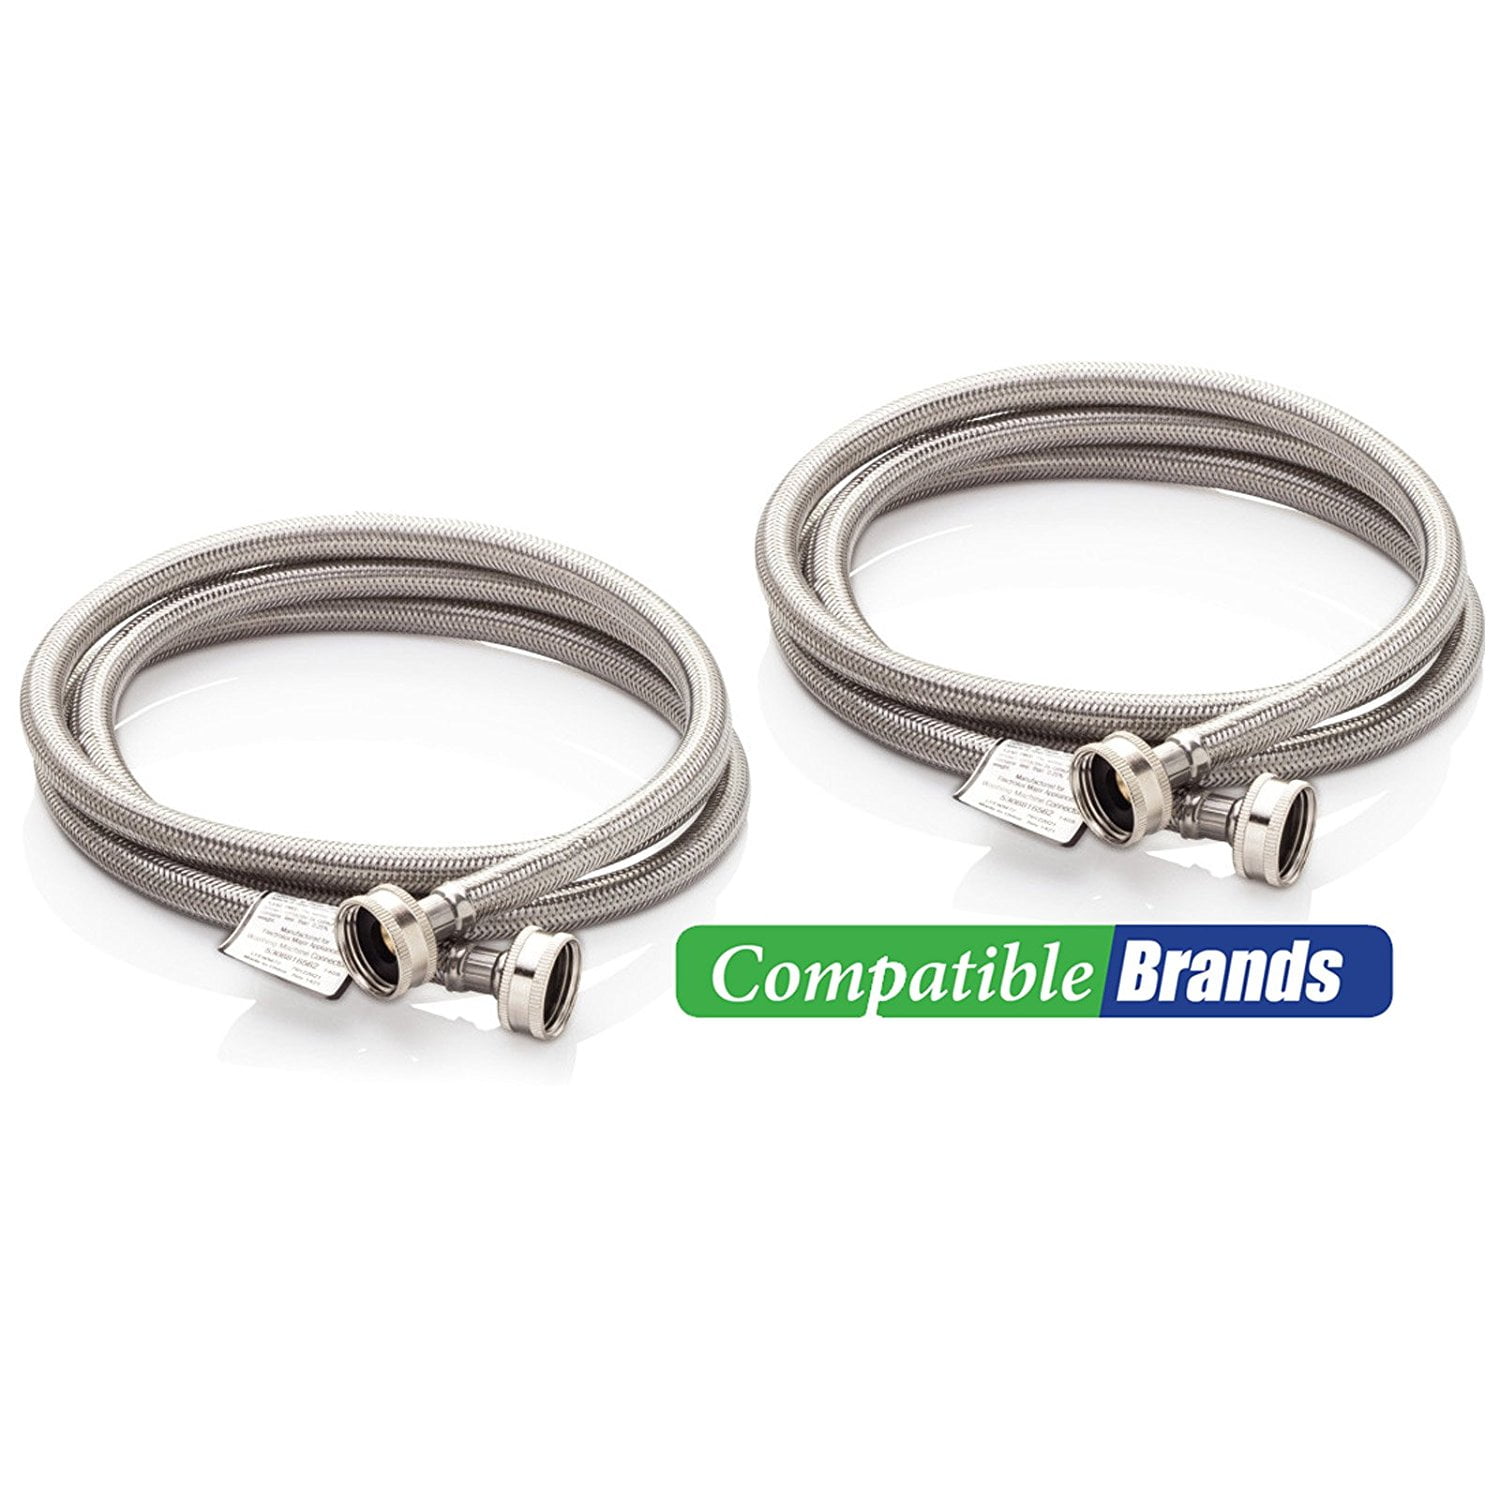 Washing Machine Fill Hoses Burst Proof 6 foot Stainless Steel Braided 6 Stainless Steel Washing Machine Fill Hose 2 Pack